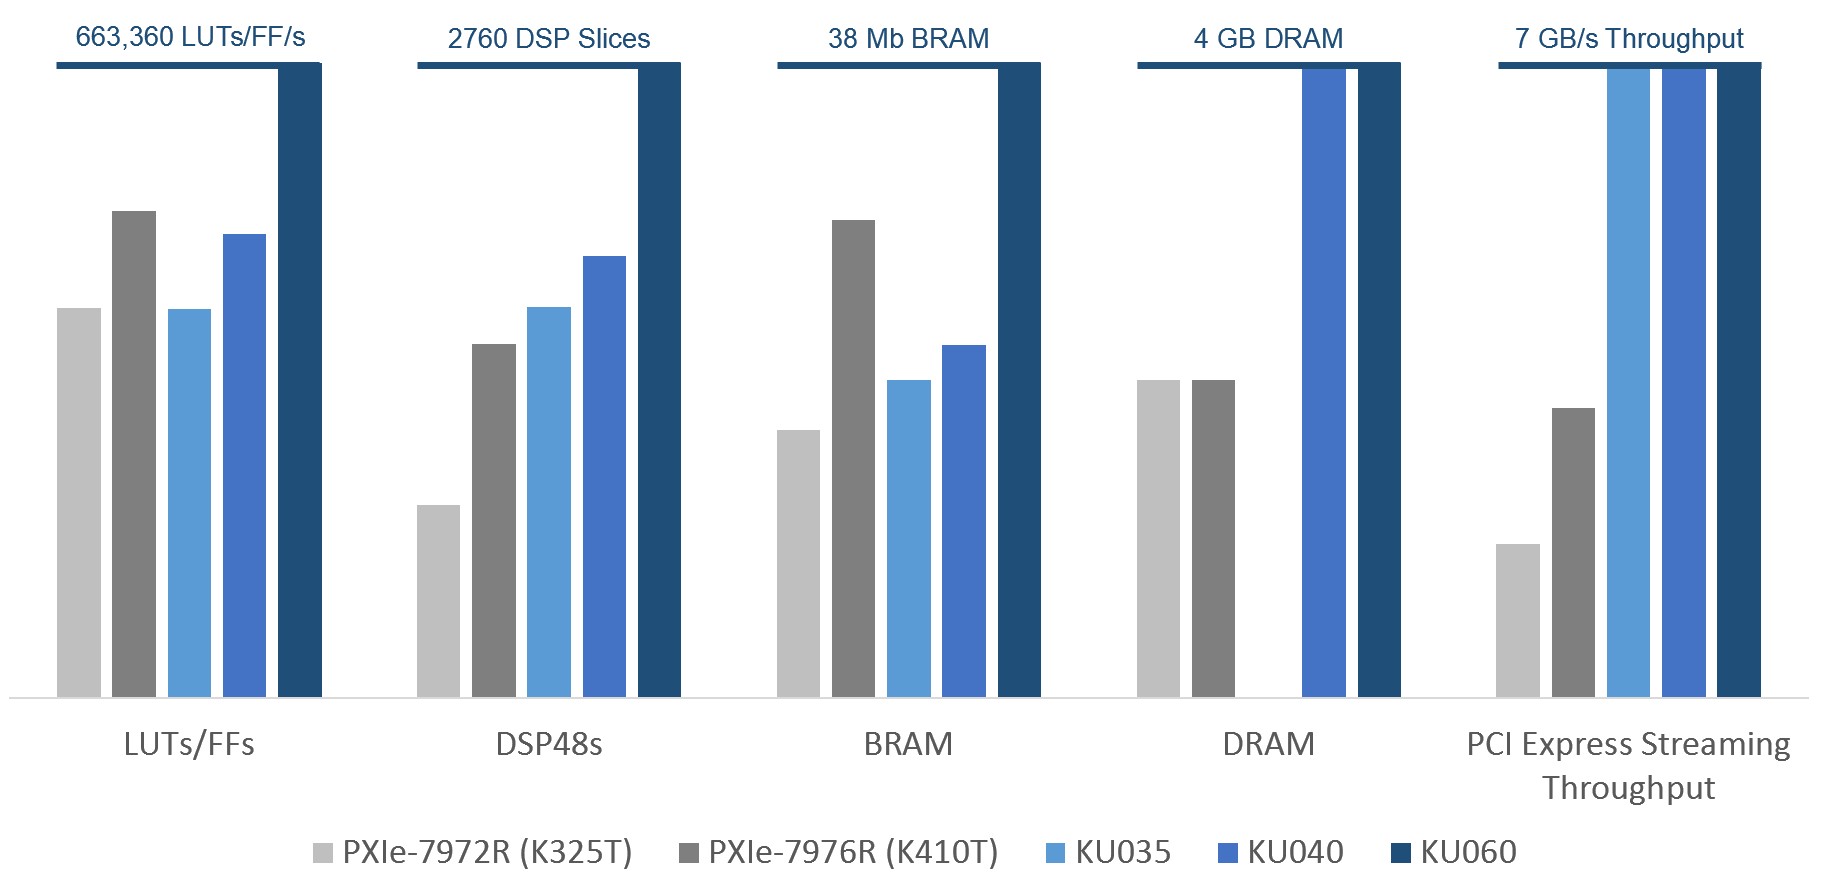 The three new UltraScale FPGA options (blue) provide a significant performance increase compared to the Kintex-7 FPGA Modules for FlexRIO (grey), at a range of price points.

